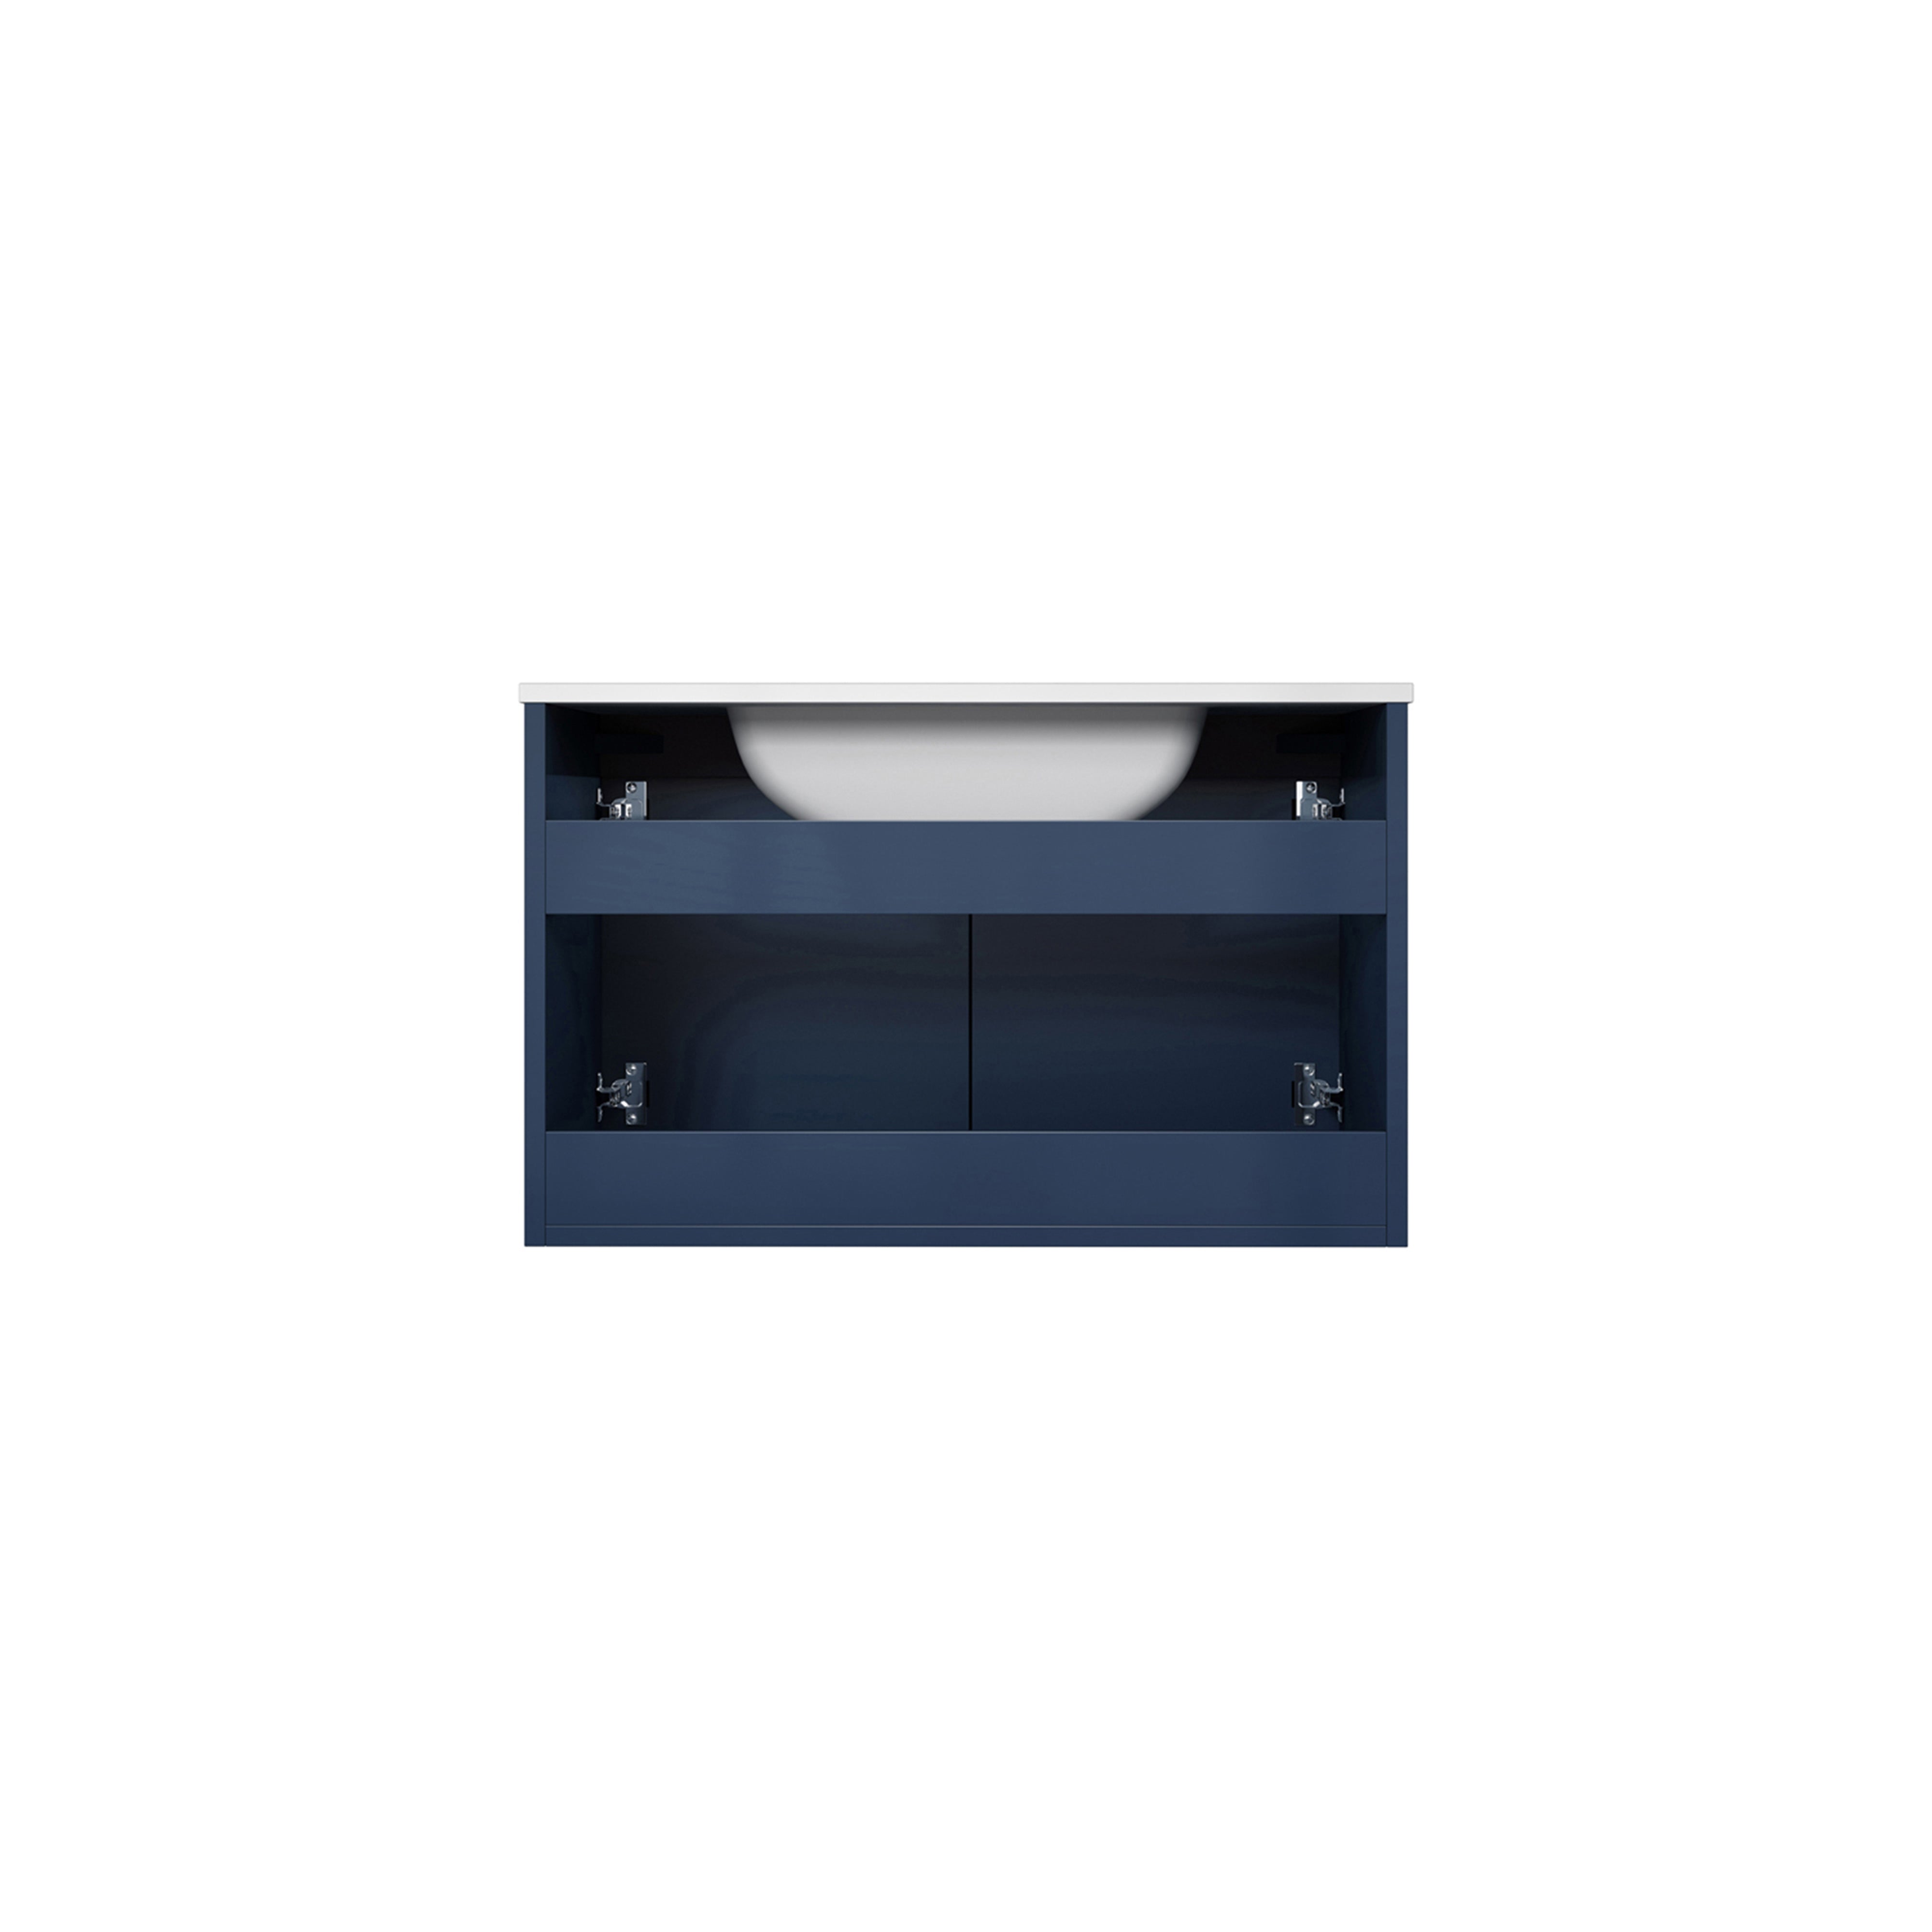 Lexora Geneva LG192230DEDS000 30" Single Wall Mounted Bathroom Vanity in Navy Blue with White Carrara Marble, White Rectangle Sink, Back View